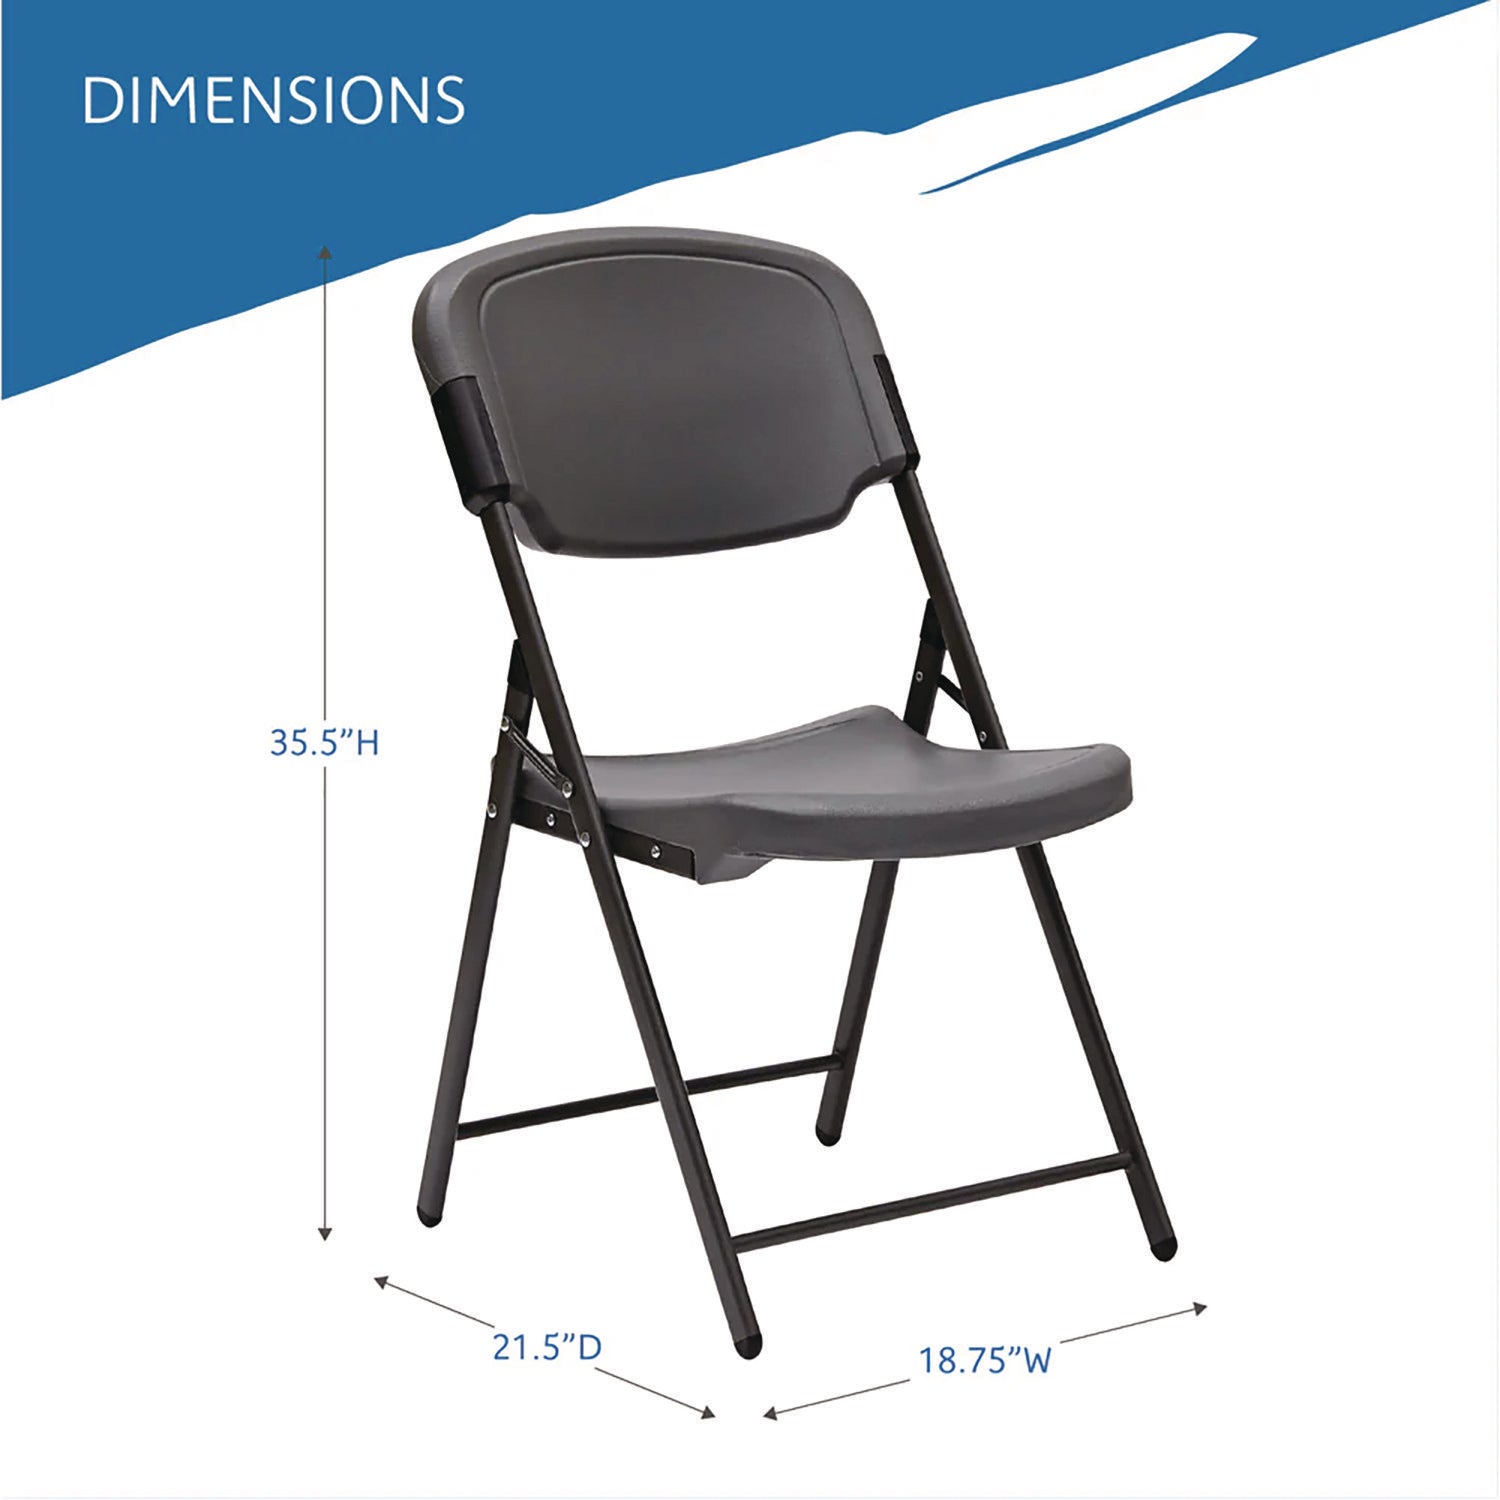 Rough n Ready Commercial Folding Chair, Supports Up to 350 lb, 15.25" Seat Height, Charcoal Seat, Charcoal Back, Silver Base - 8